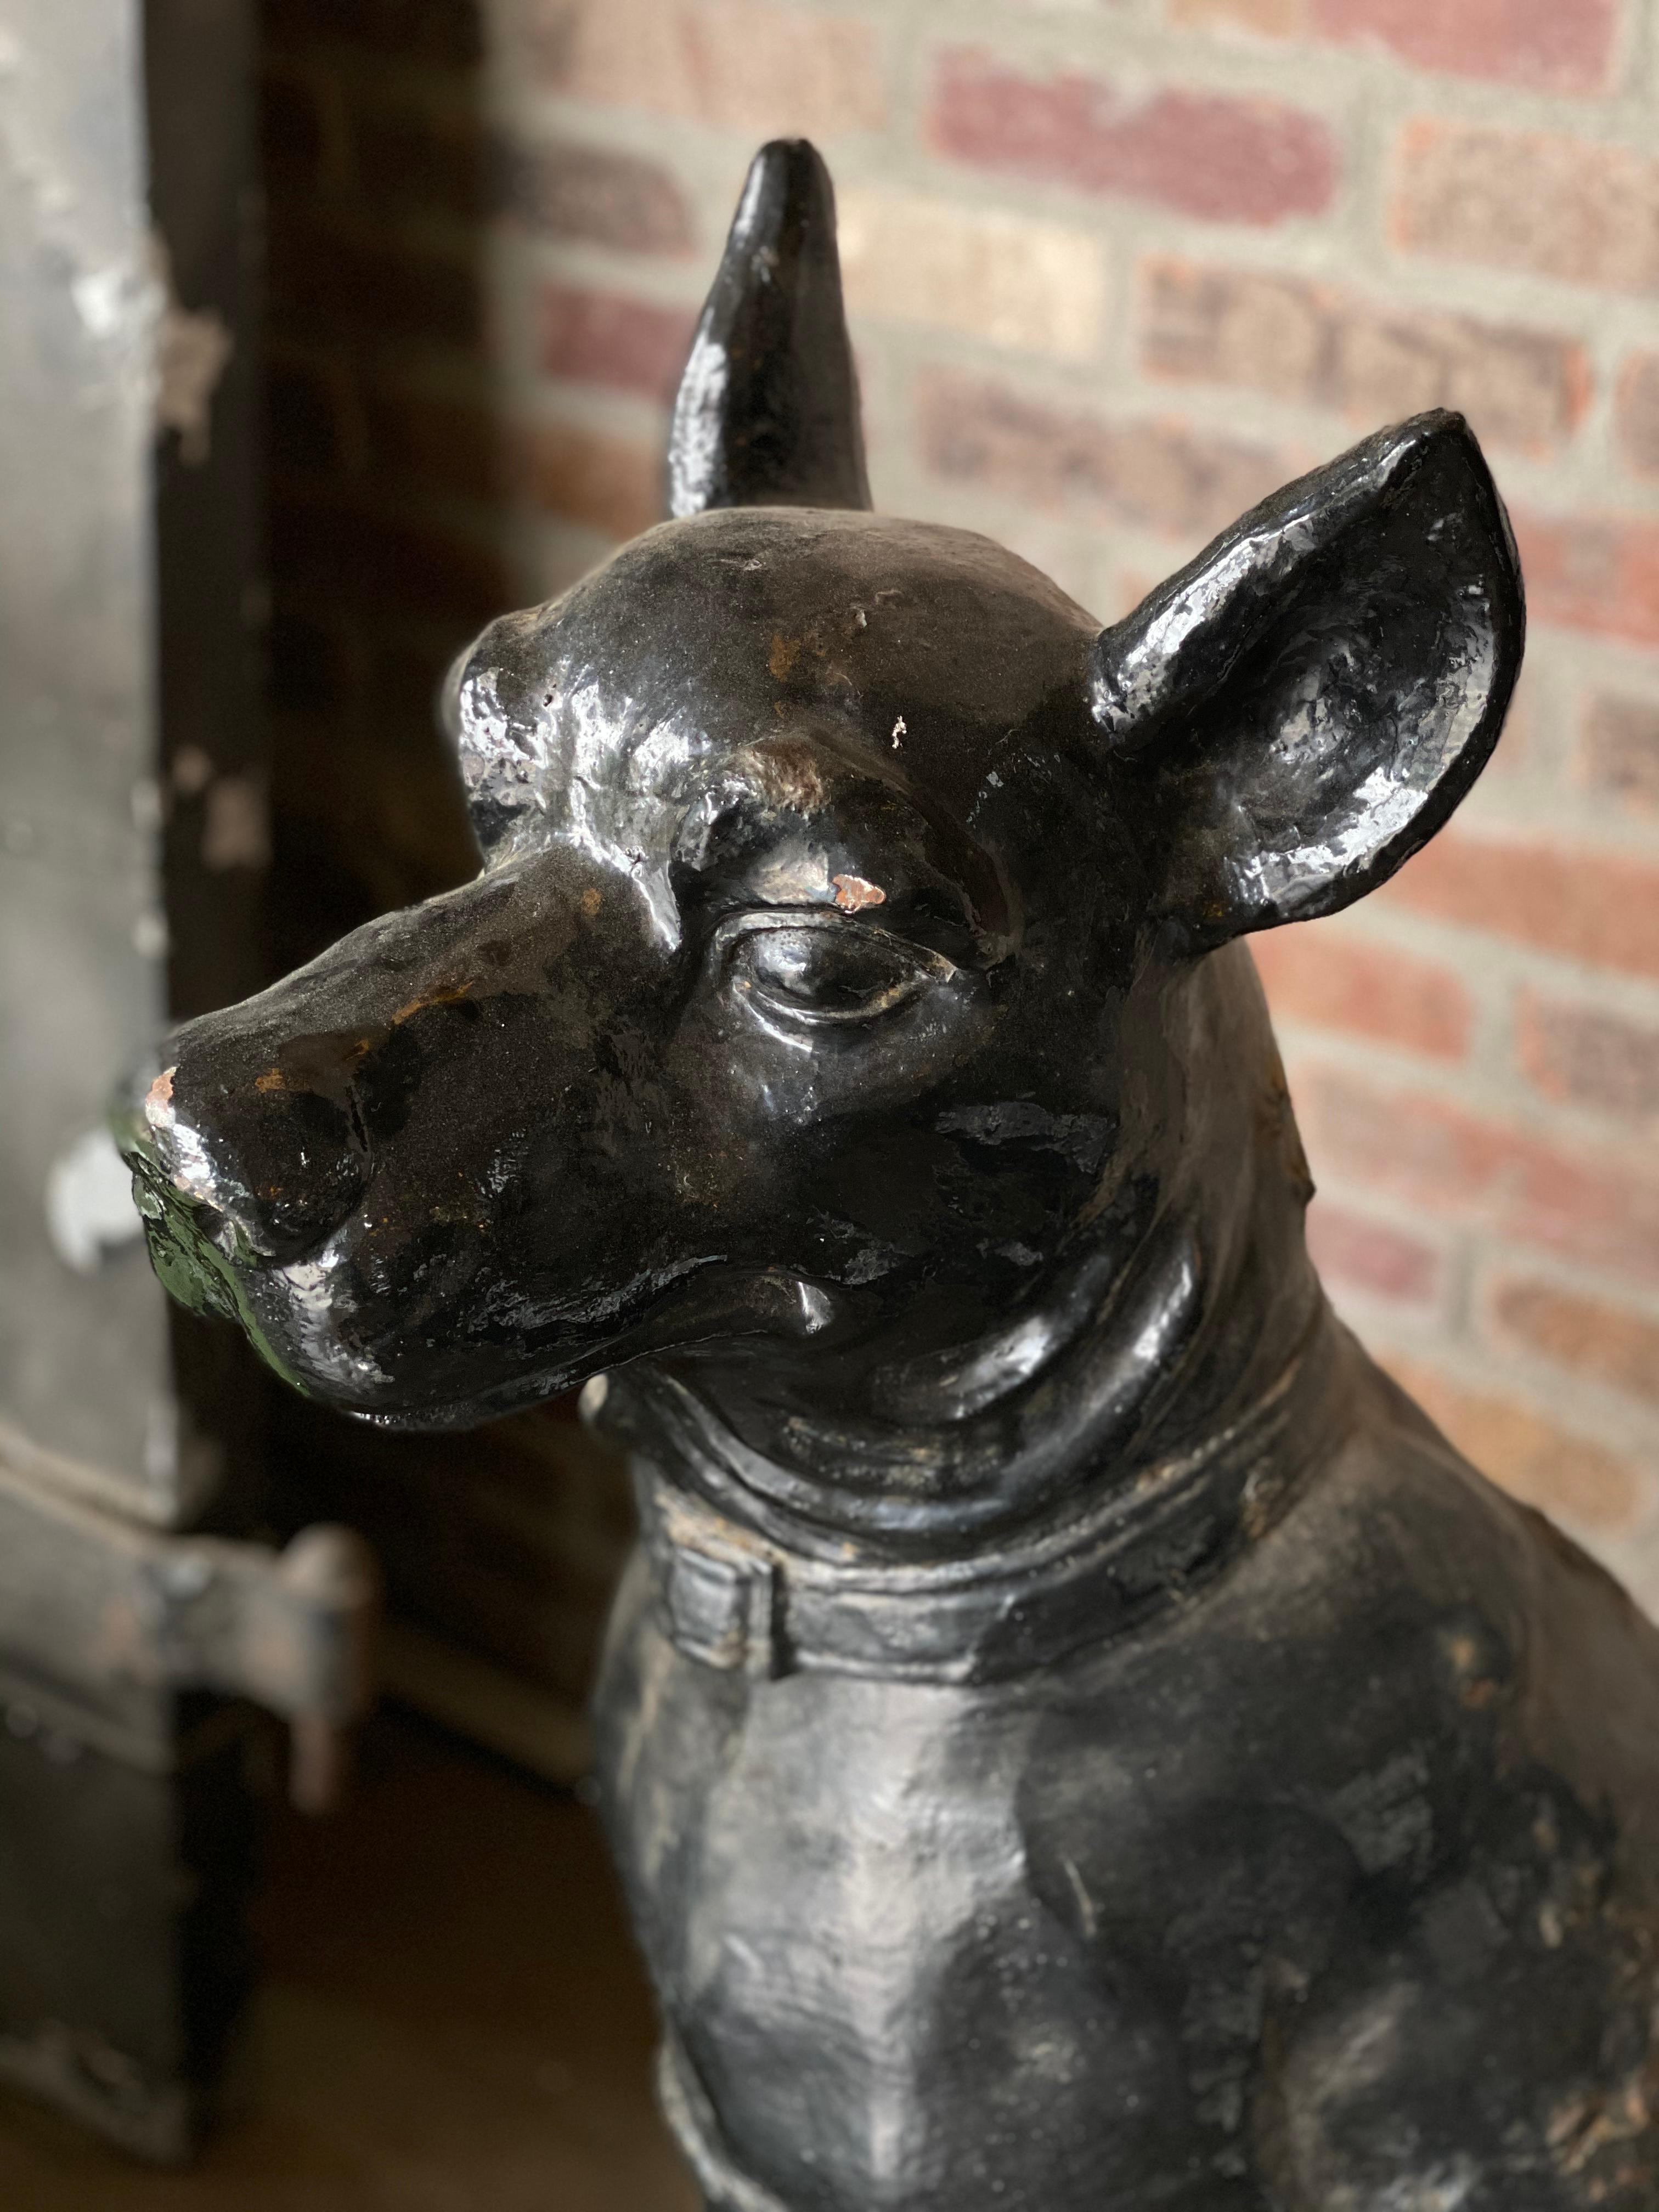 Monumentally scaled 19th century cast iron garden sculptures featuring a pair of dignified dogs with extraordinary presence. Original black painted finish is in good condition, with authentic age. Heads and tails are on opposite sides, with the